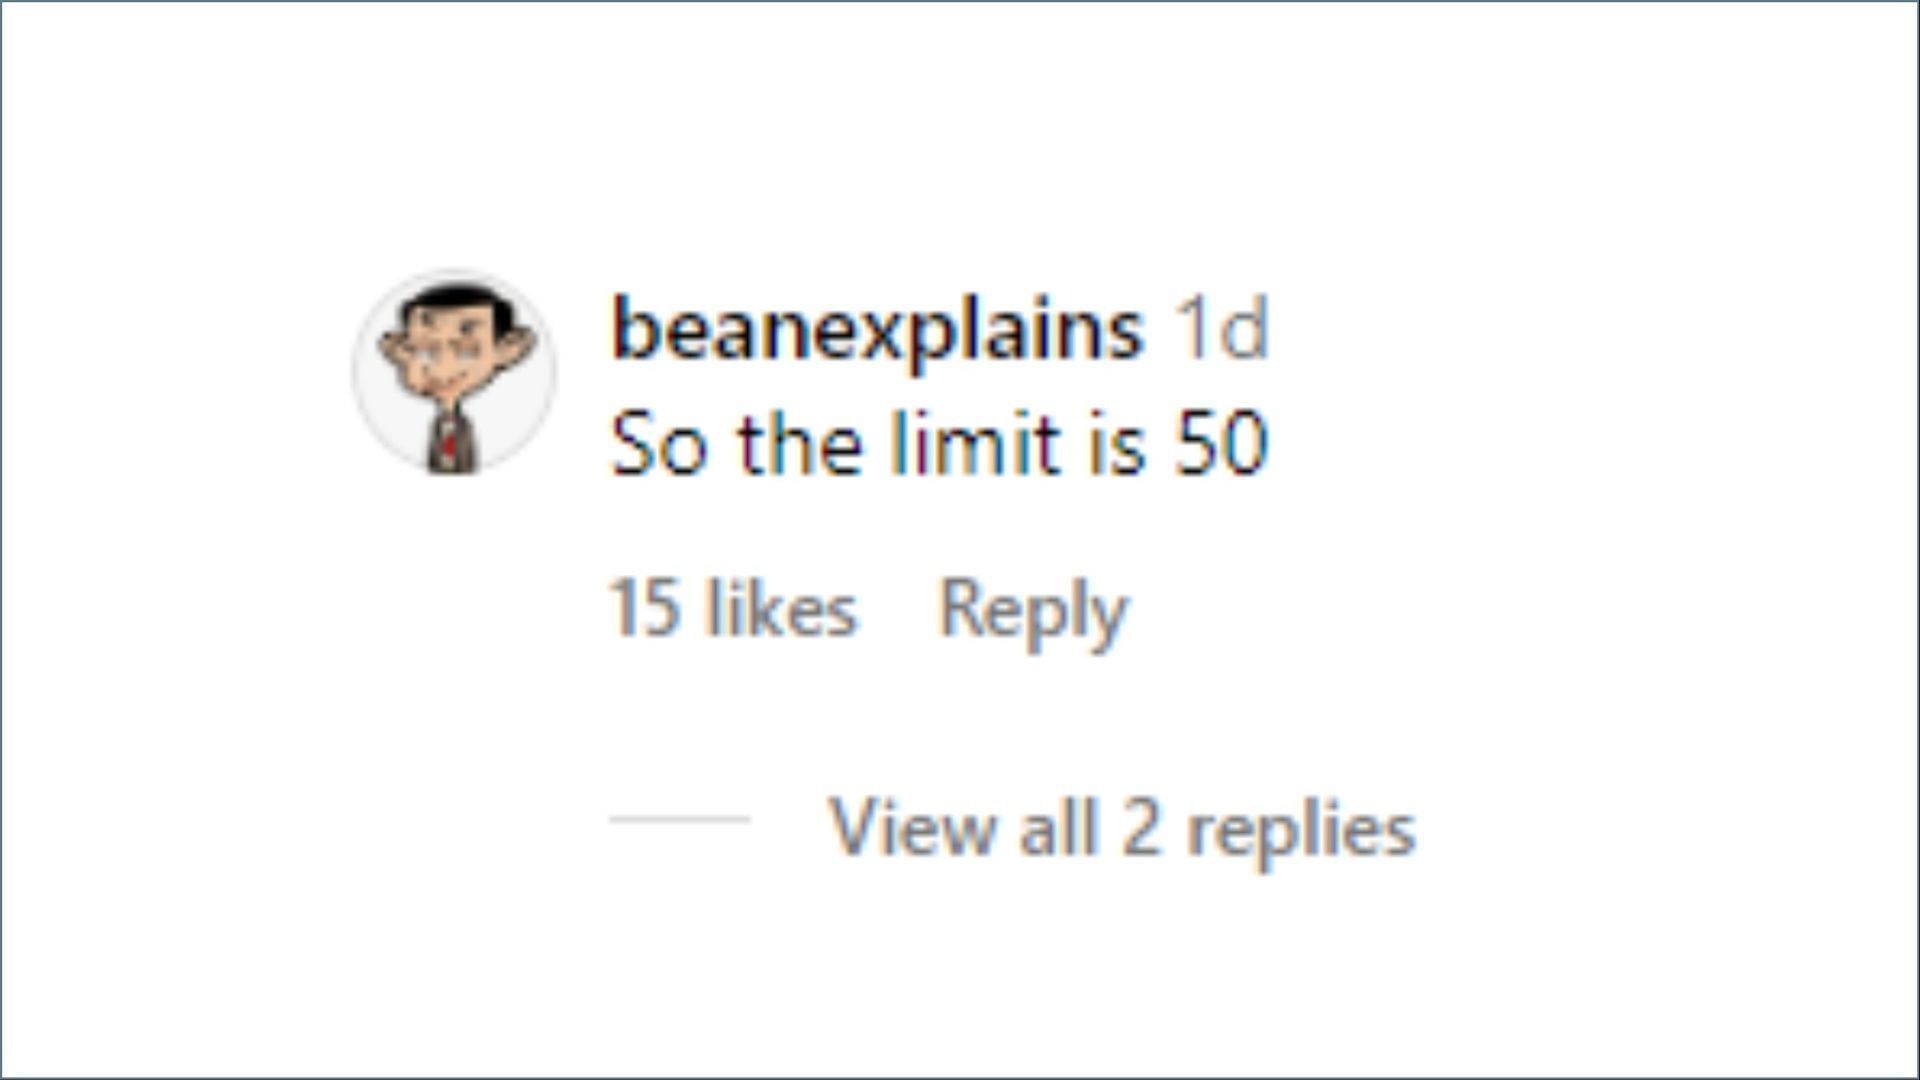 Comment by the user @beanexplains (Image via Instagram)